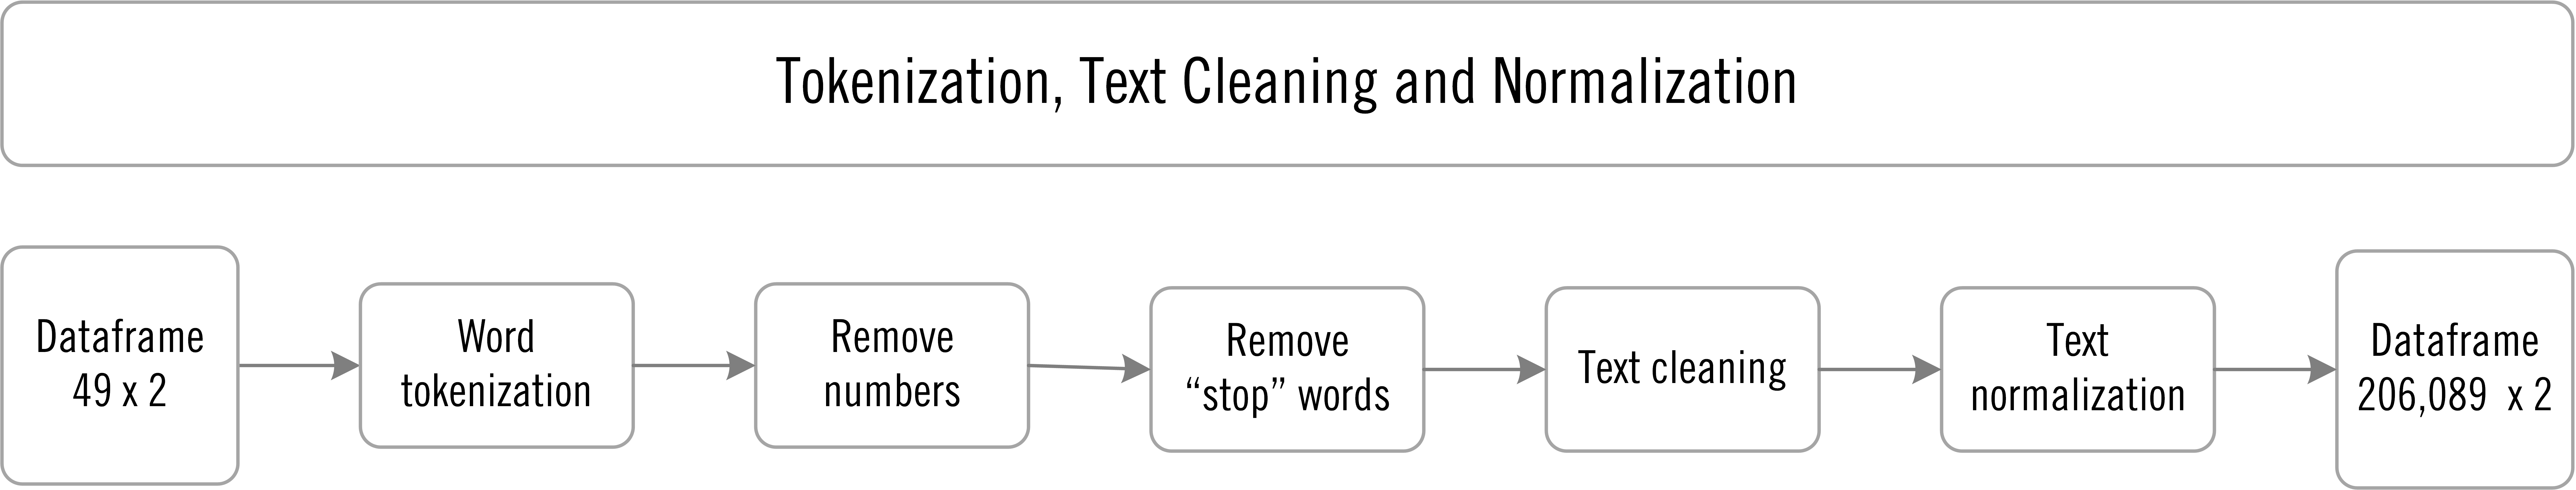 Roadmap for Tokenization and Text Cleaning and Normalization